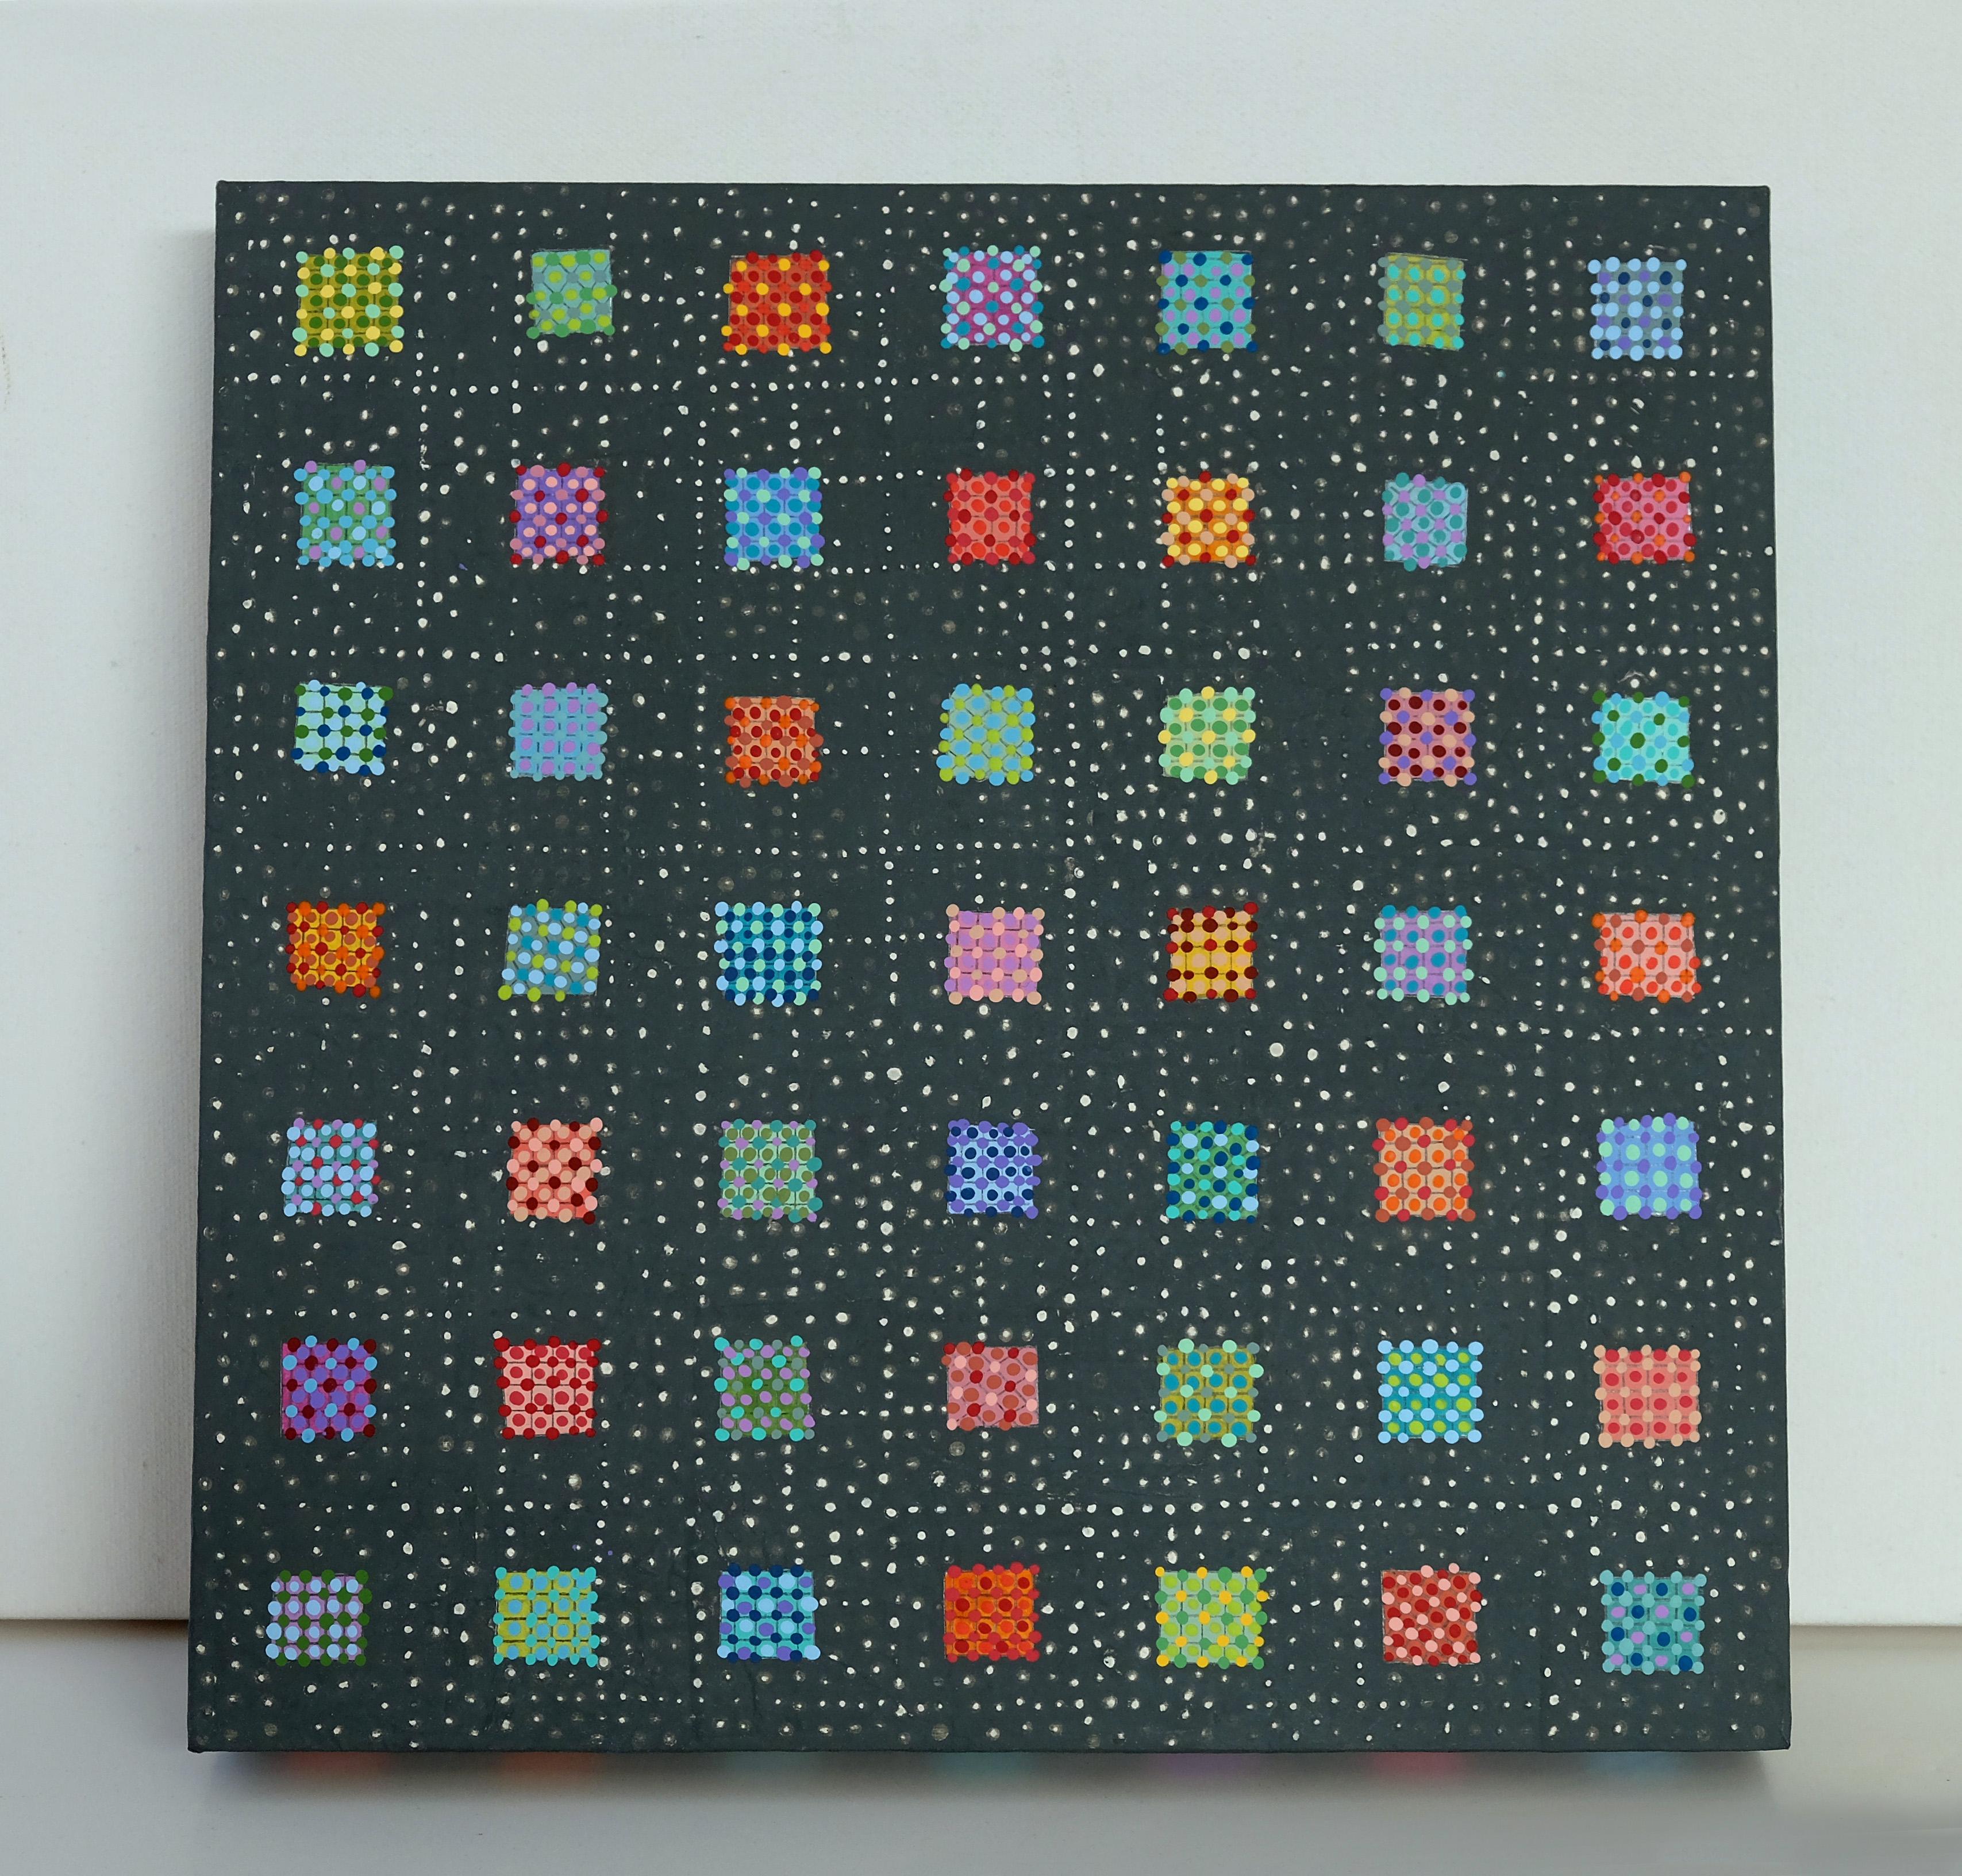 <p>Artist Comments<br>A vibrant modern abstract featuring a uniform framework by artist Terri Bell. The dark grey background is covered with a grid pattern in small white spheres. Within each area are colorful small squares comprised of ordered dots